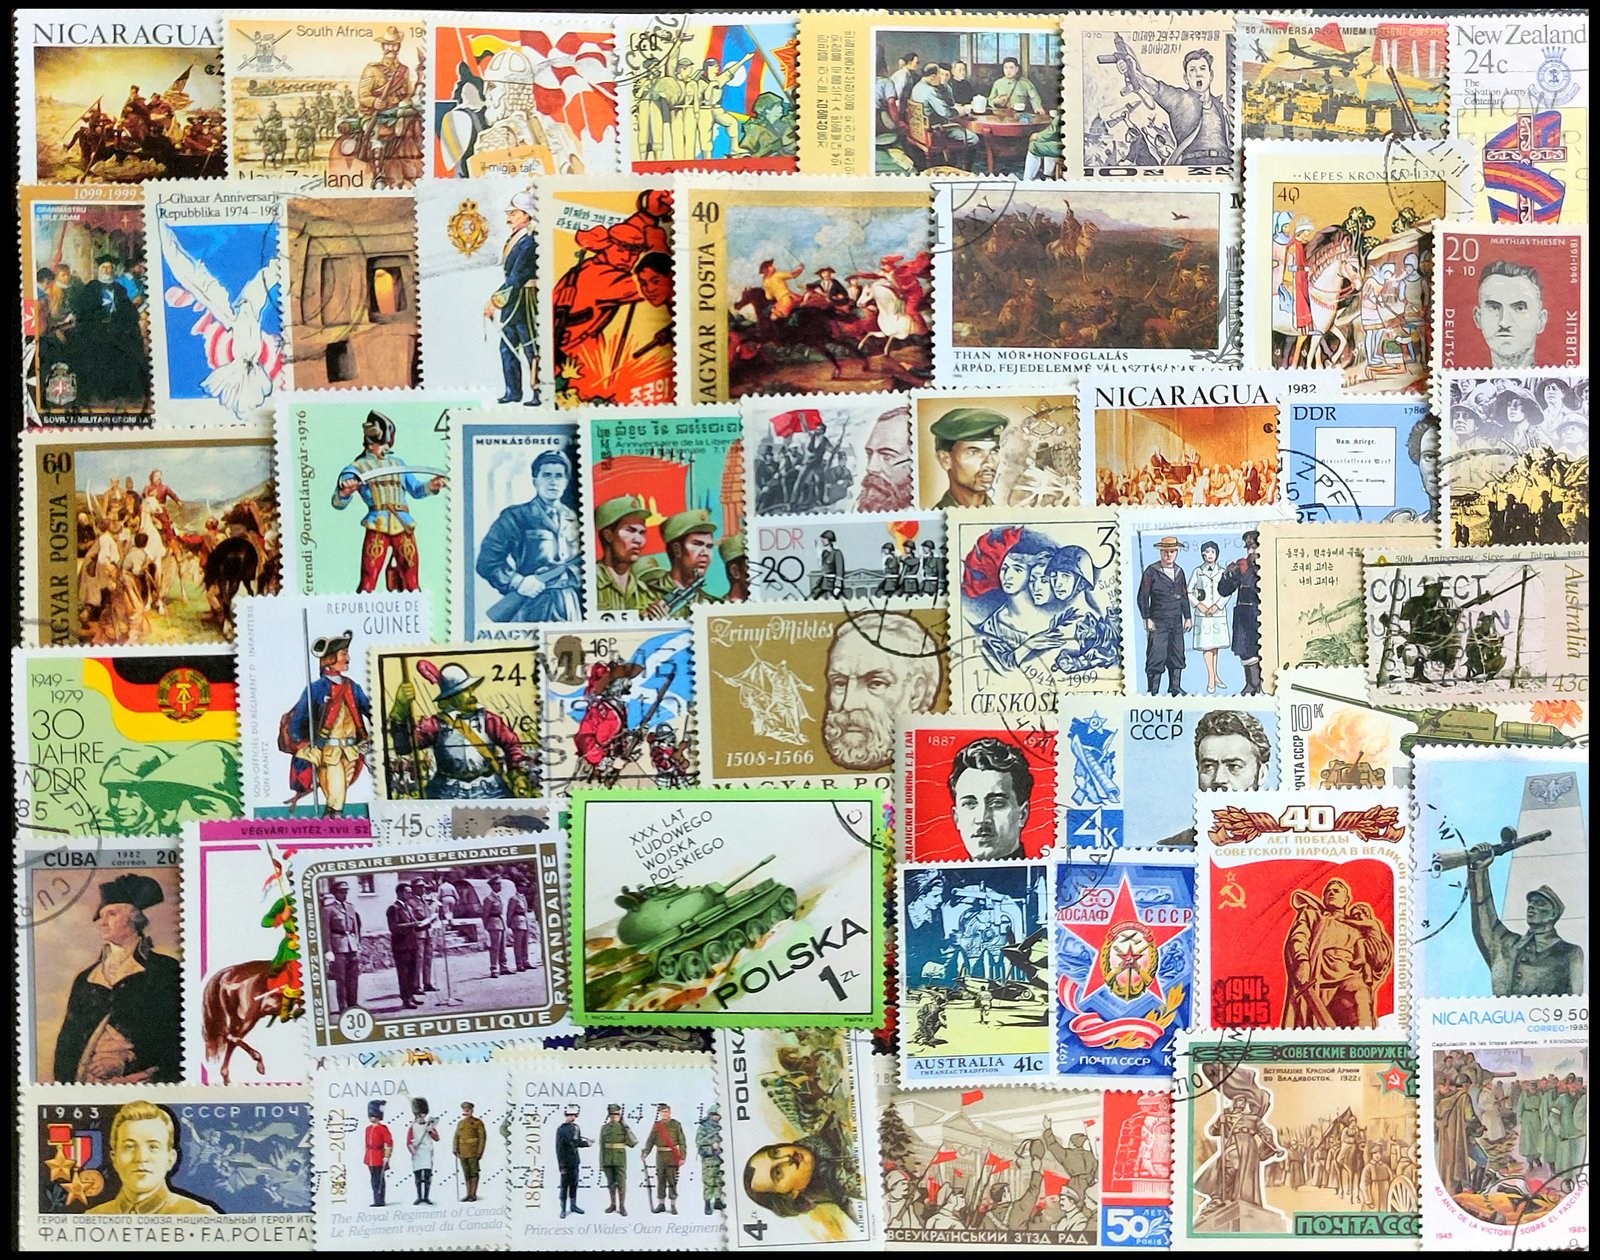 WAR SCENES, Army, Military, Worldwide 100 Different Stamps